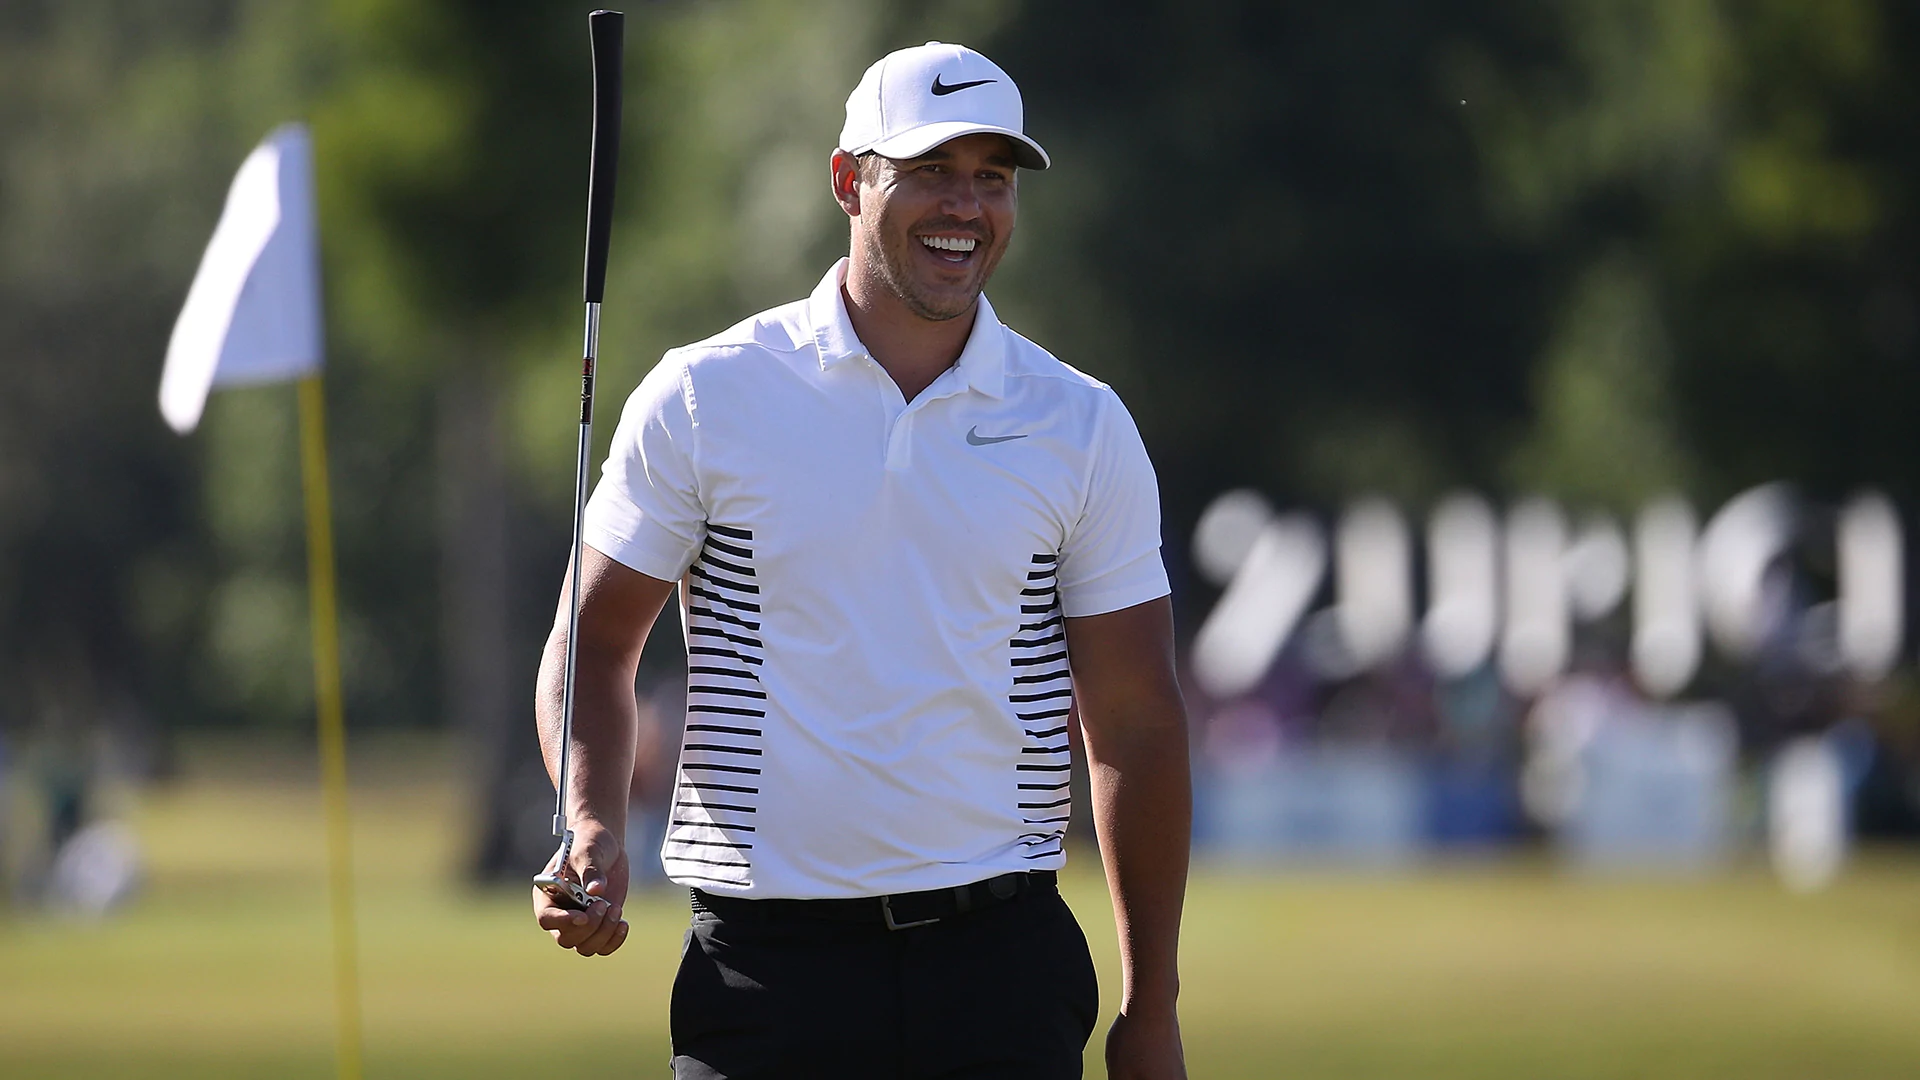 Koepka's game 'where it should be' even after injury